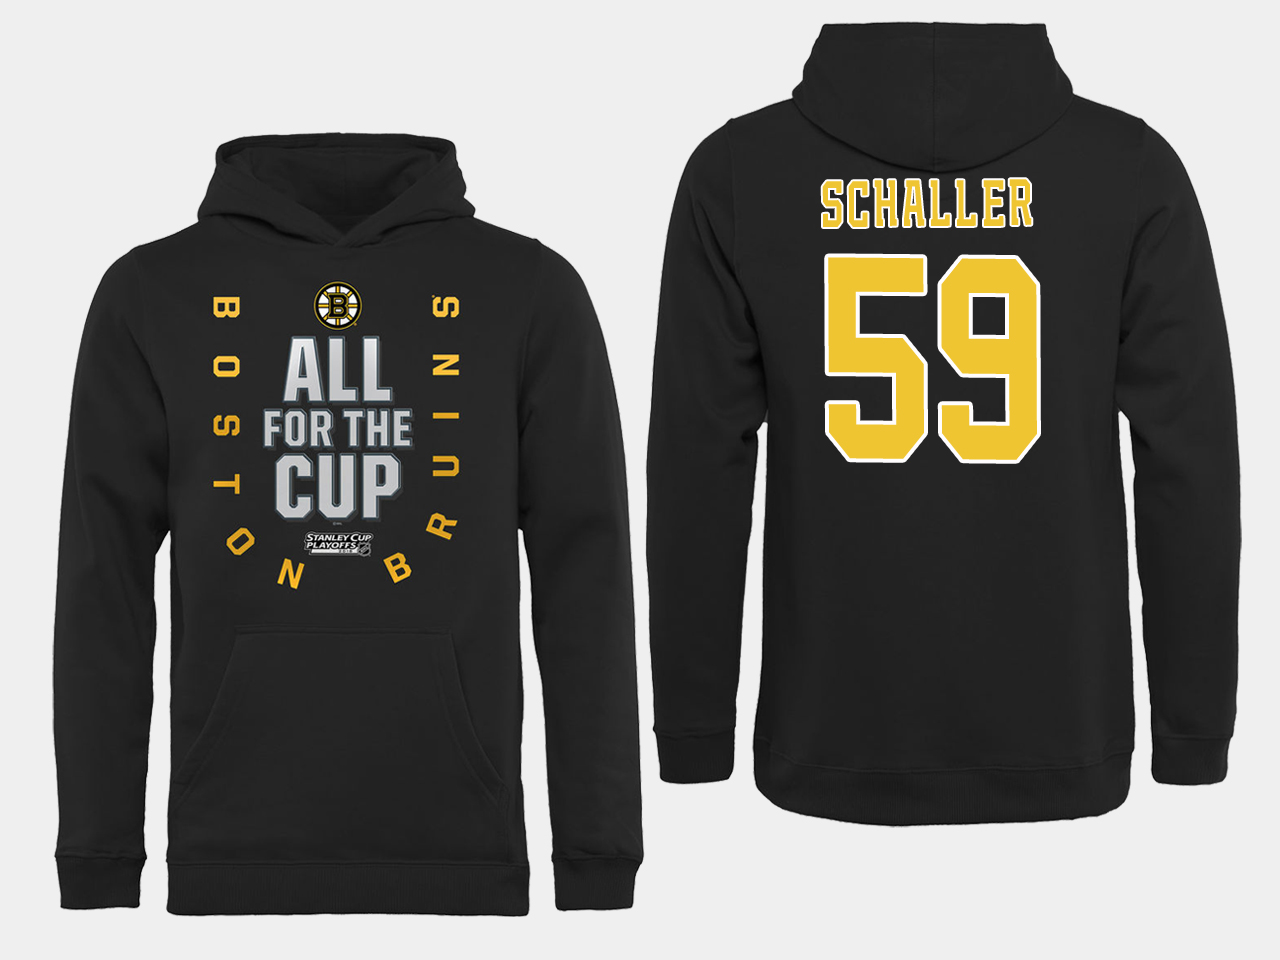 NHL Men Boston Bruins 59 Schaller Black All for the Cup Hoodie